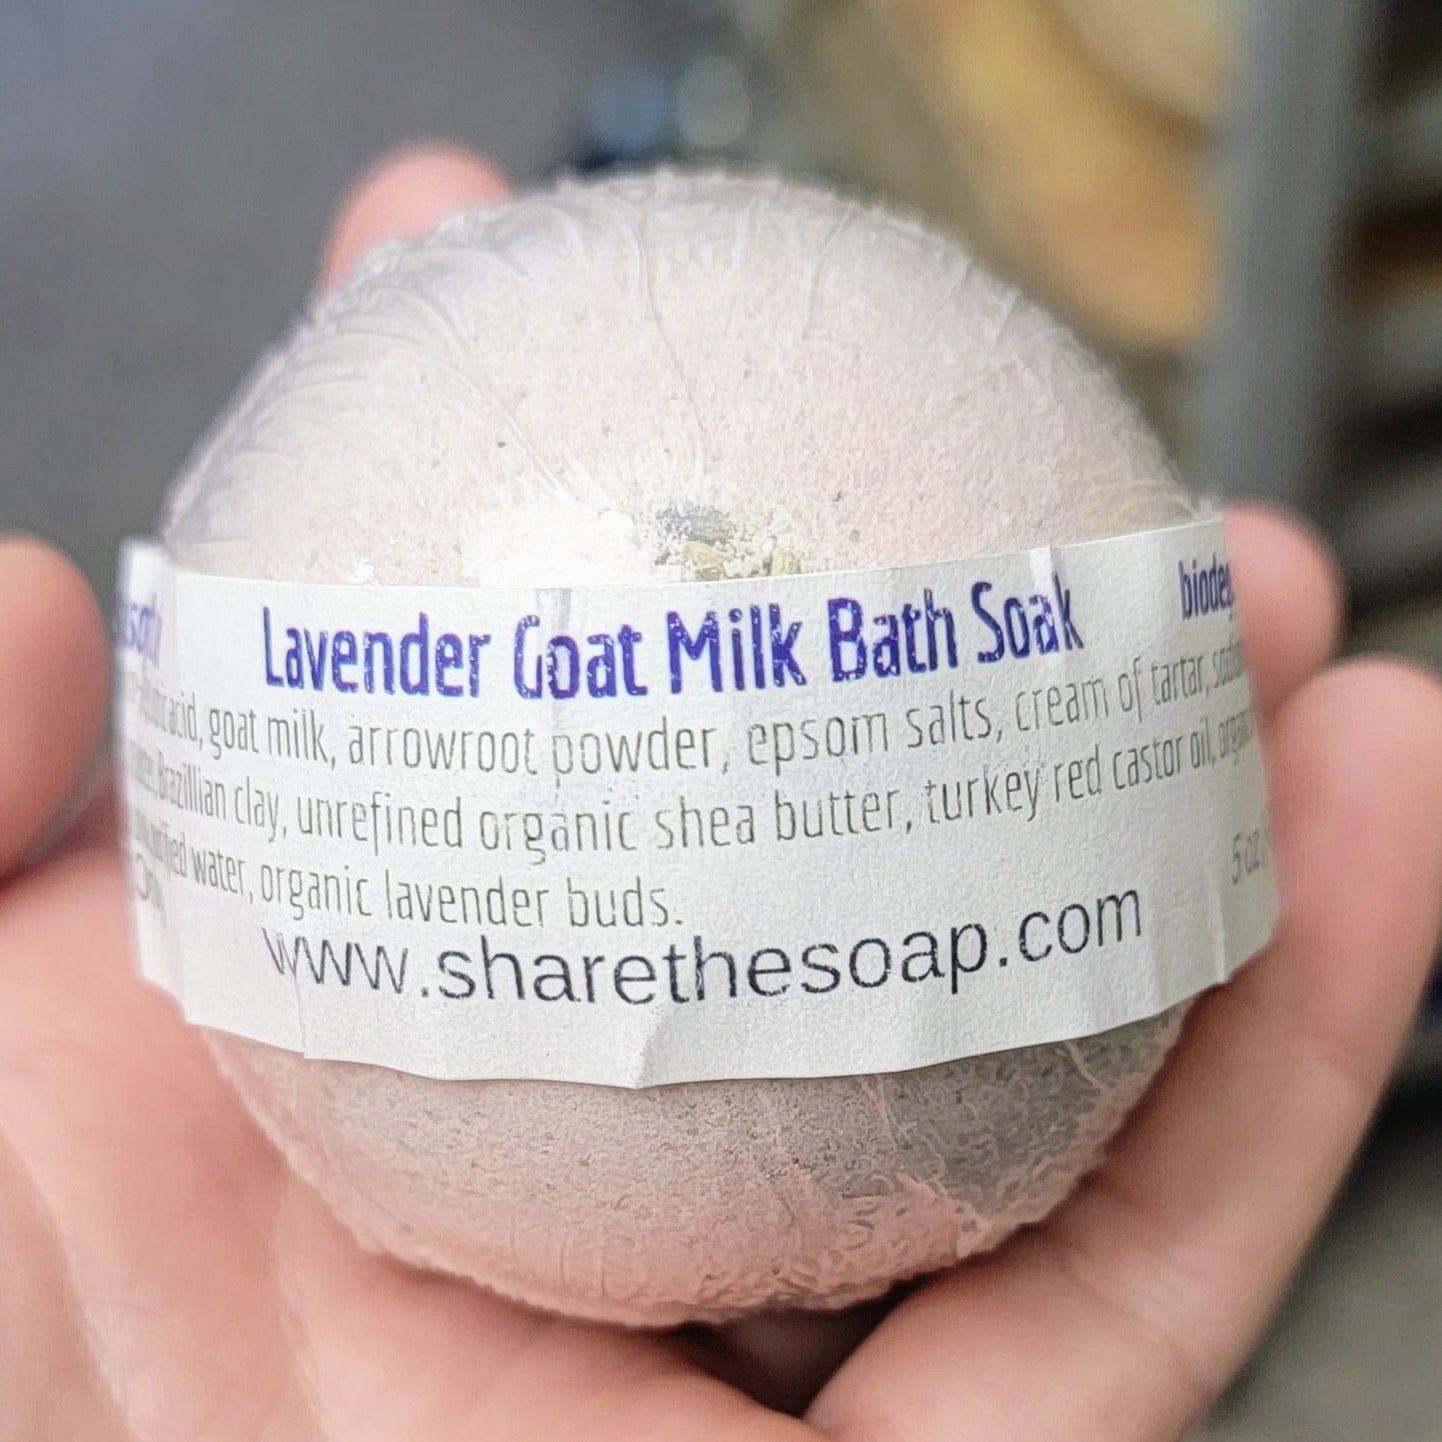 Bulgarian Lavender Essential Oil Goat Milk Bath Soak with clay shea butter and organic lavender buds made at sharethesoap.com